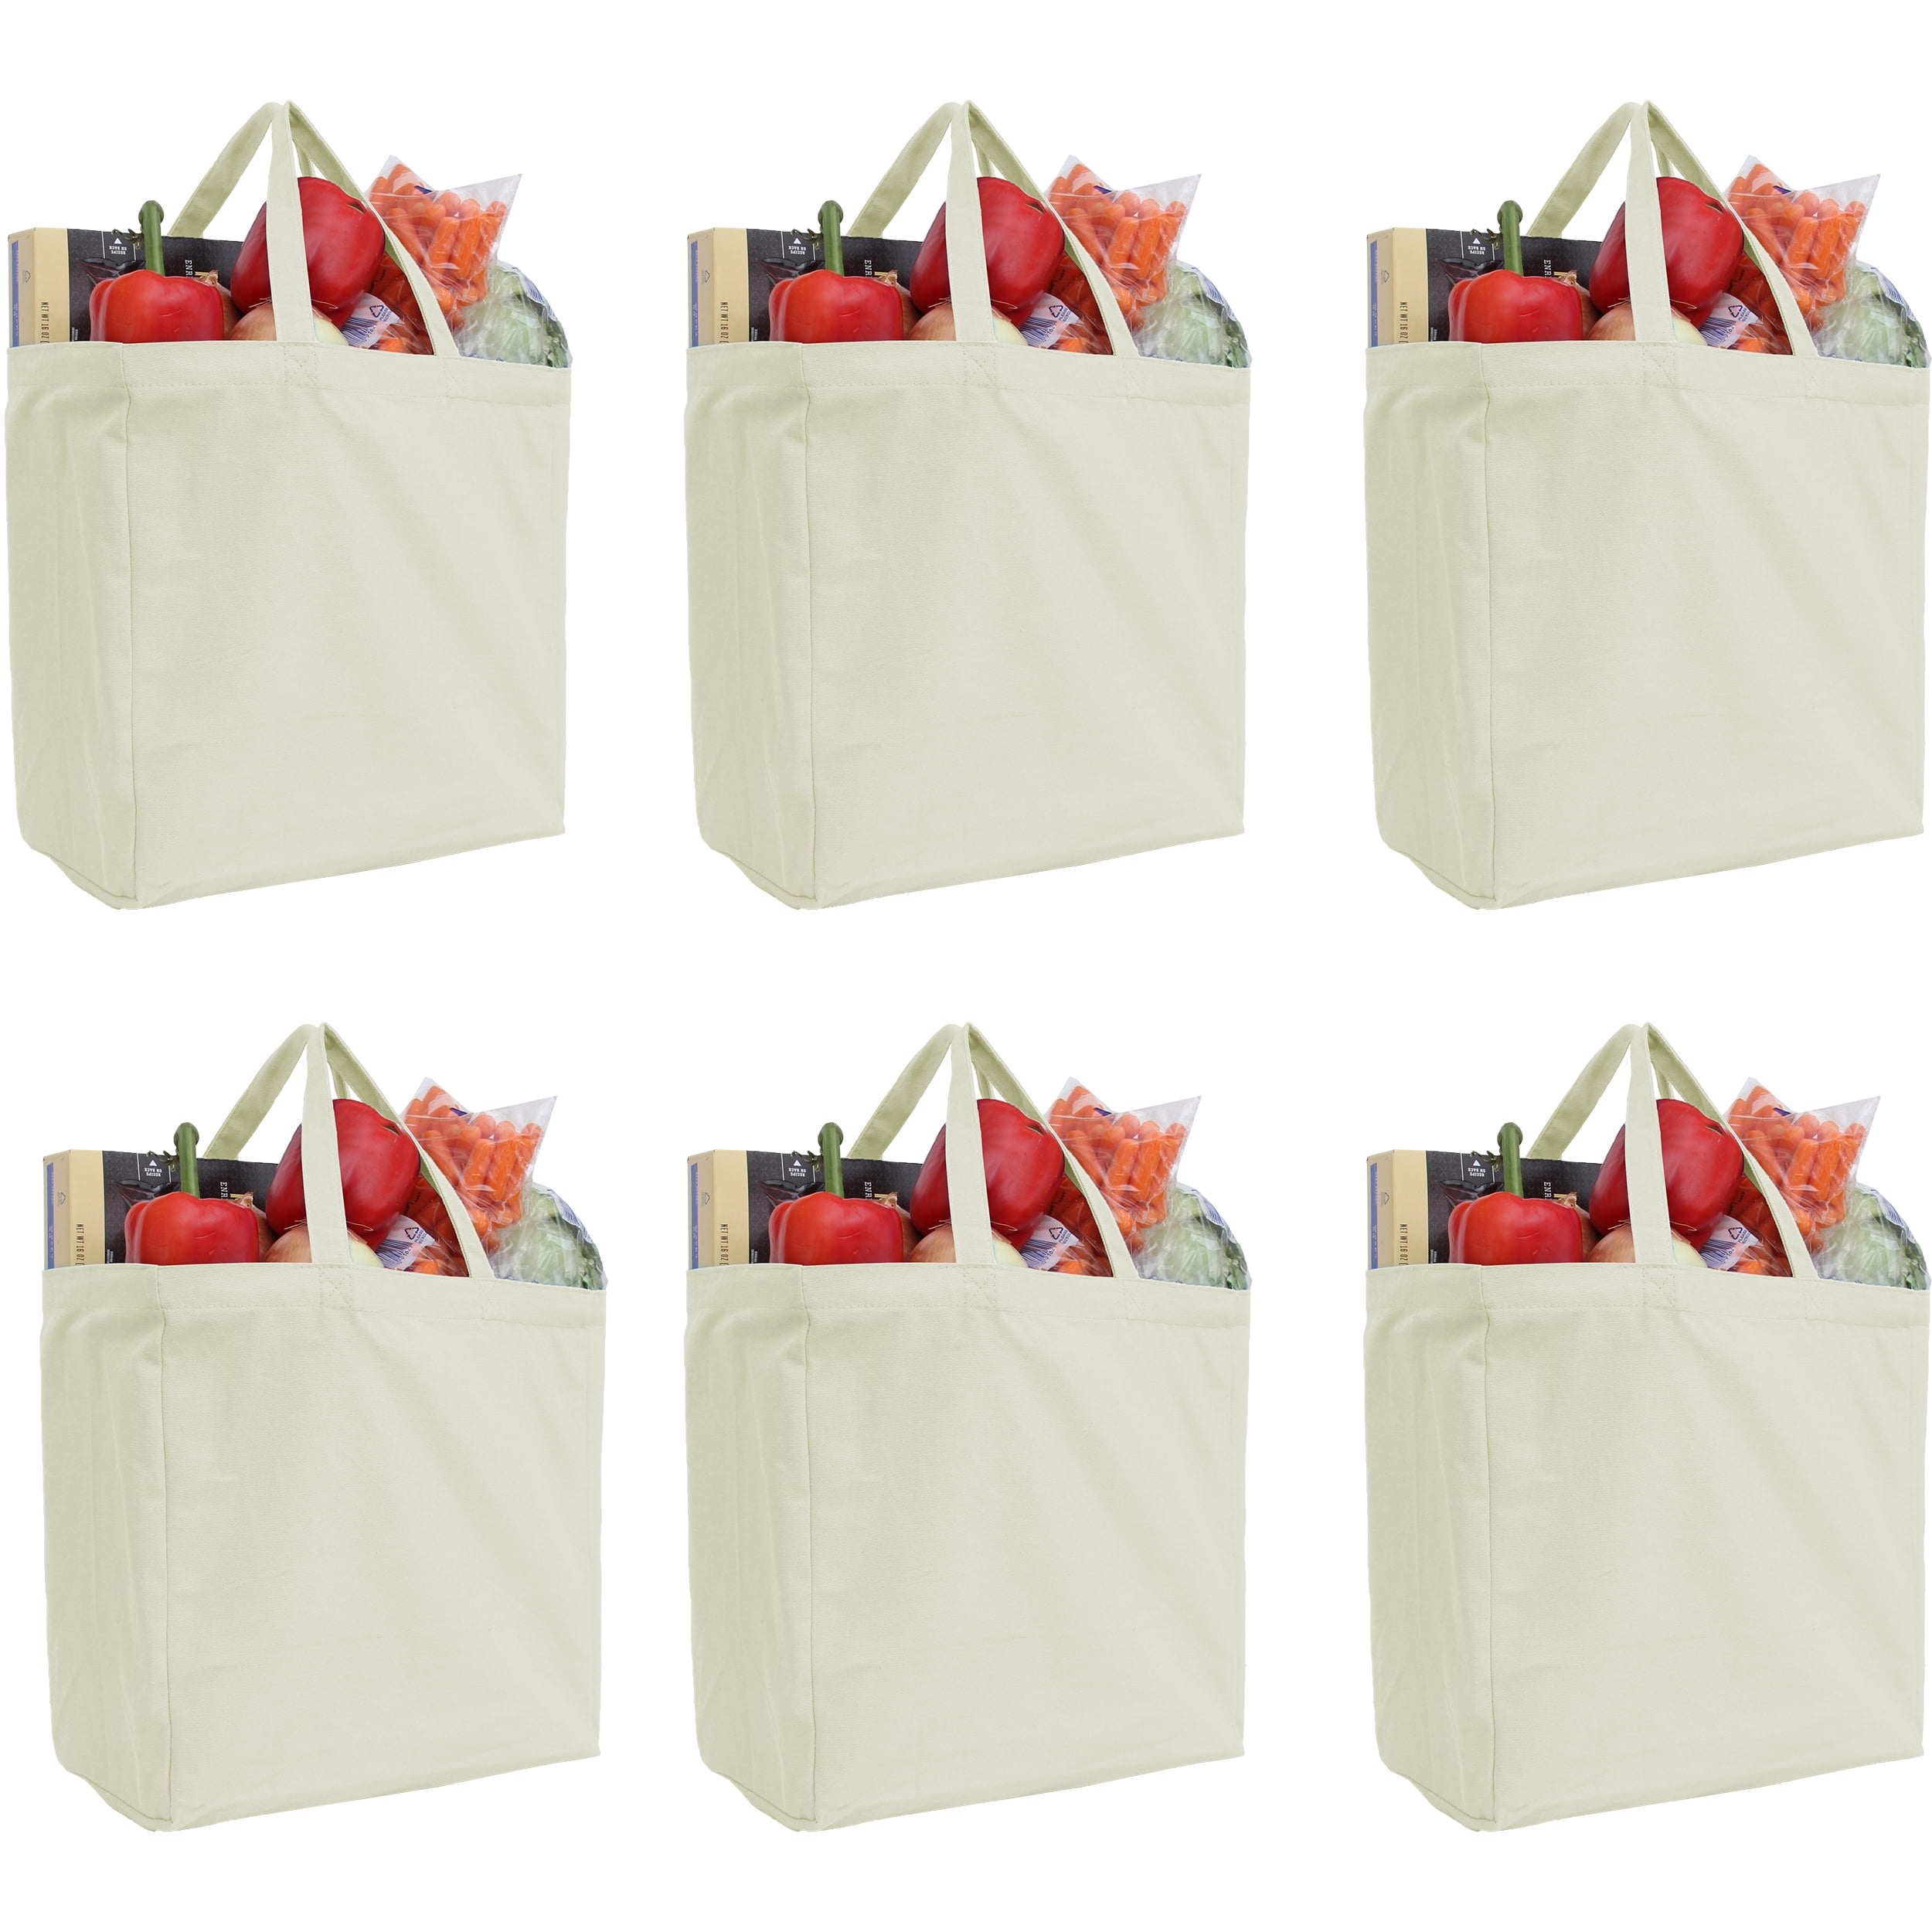 5 Pack Durable Cotton Canvas Reusable Shopping Grocery Bag Tote Bag Eco Friendly 